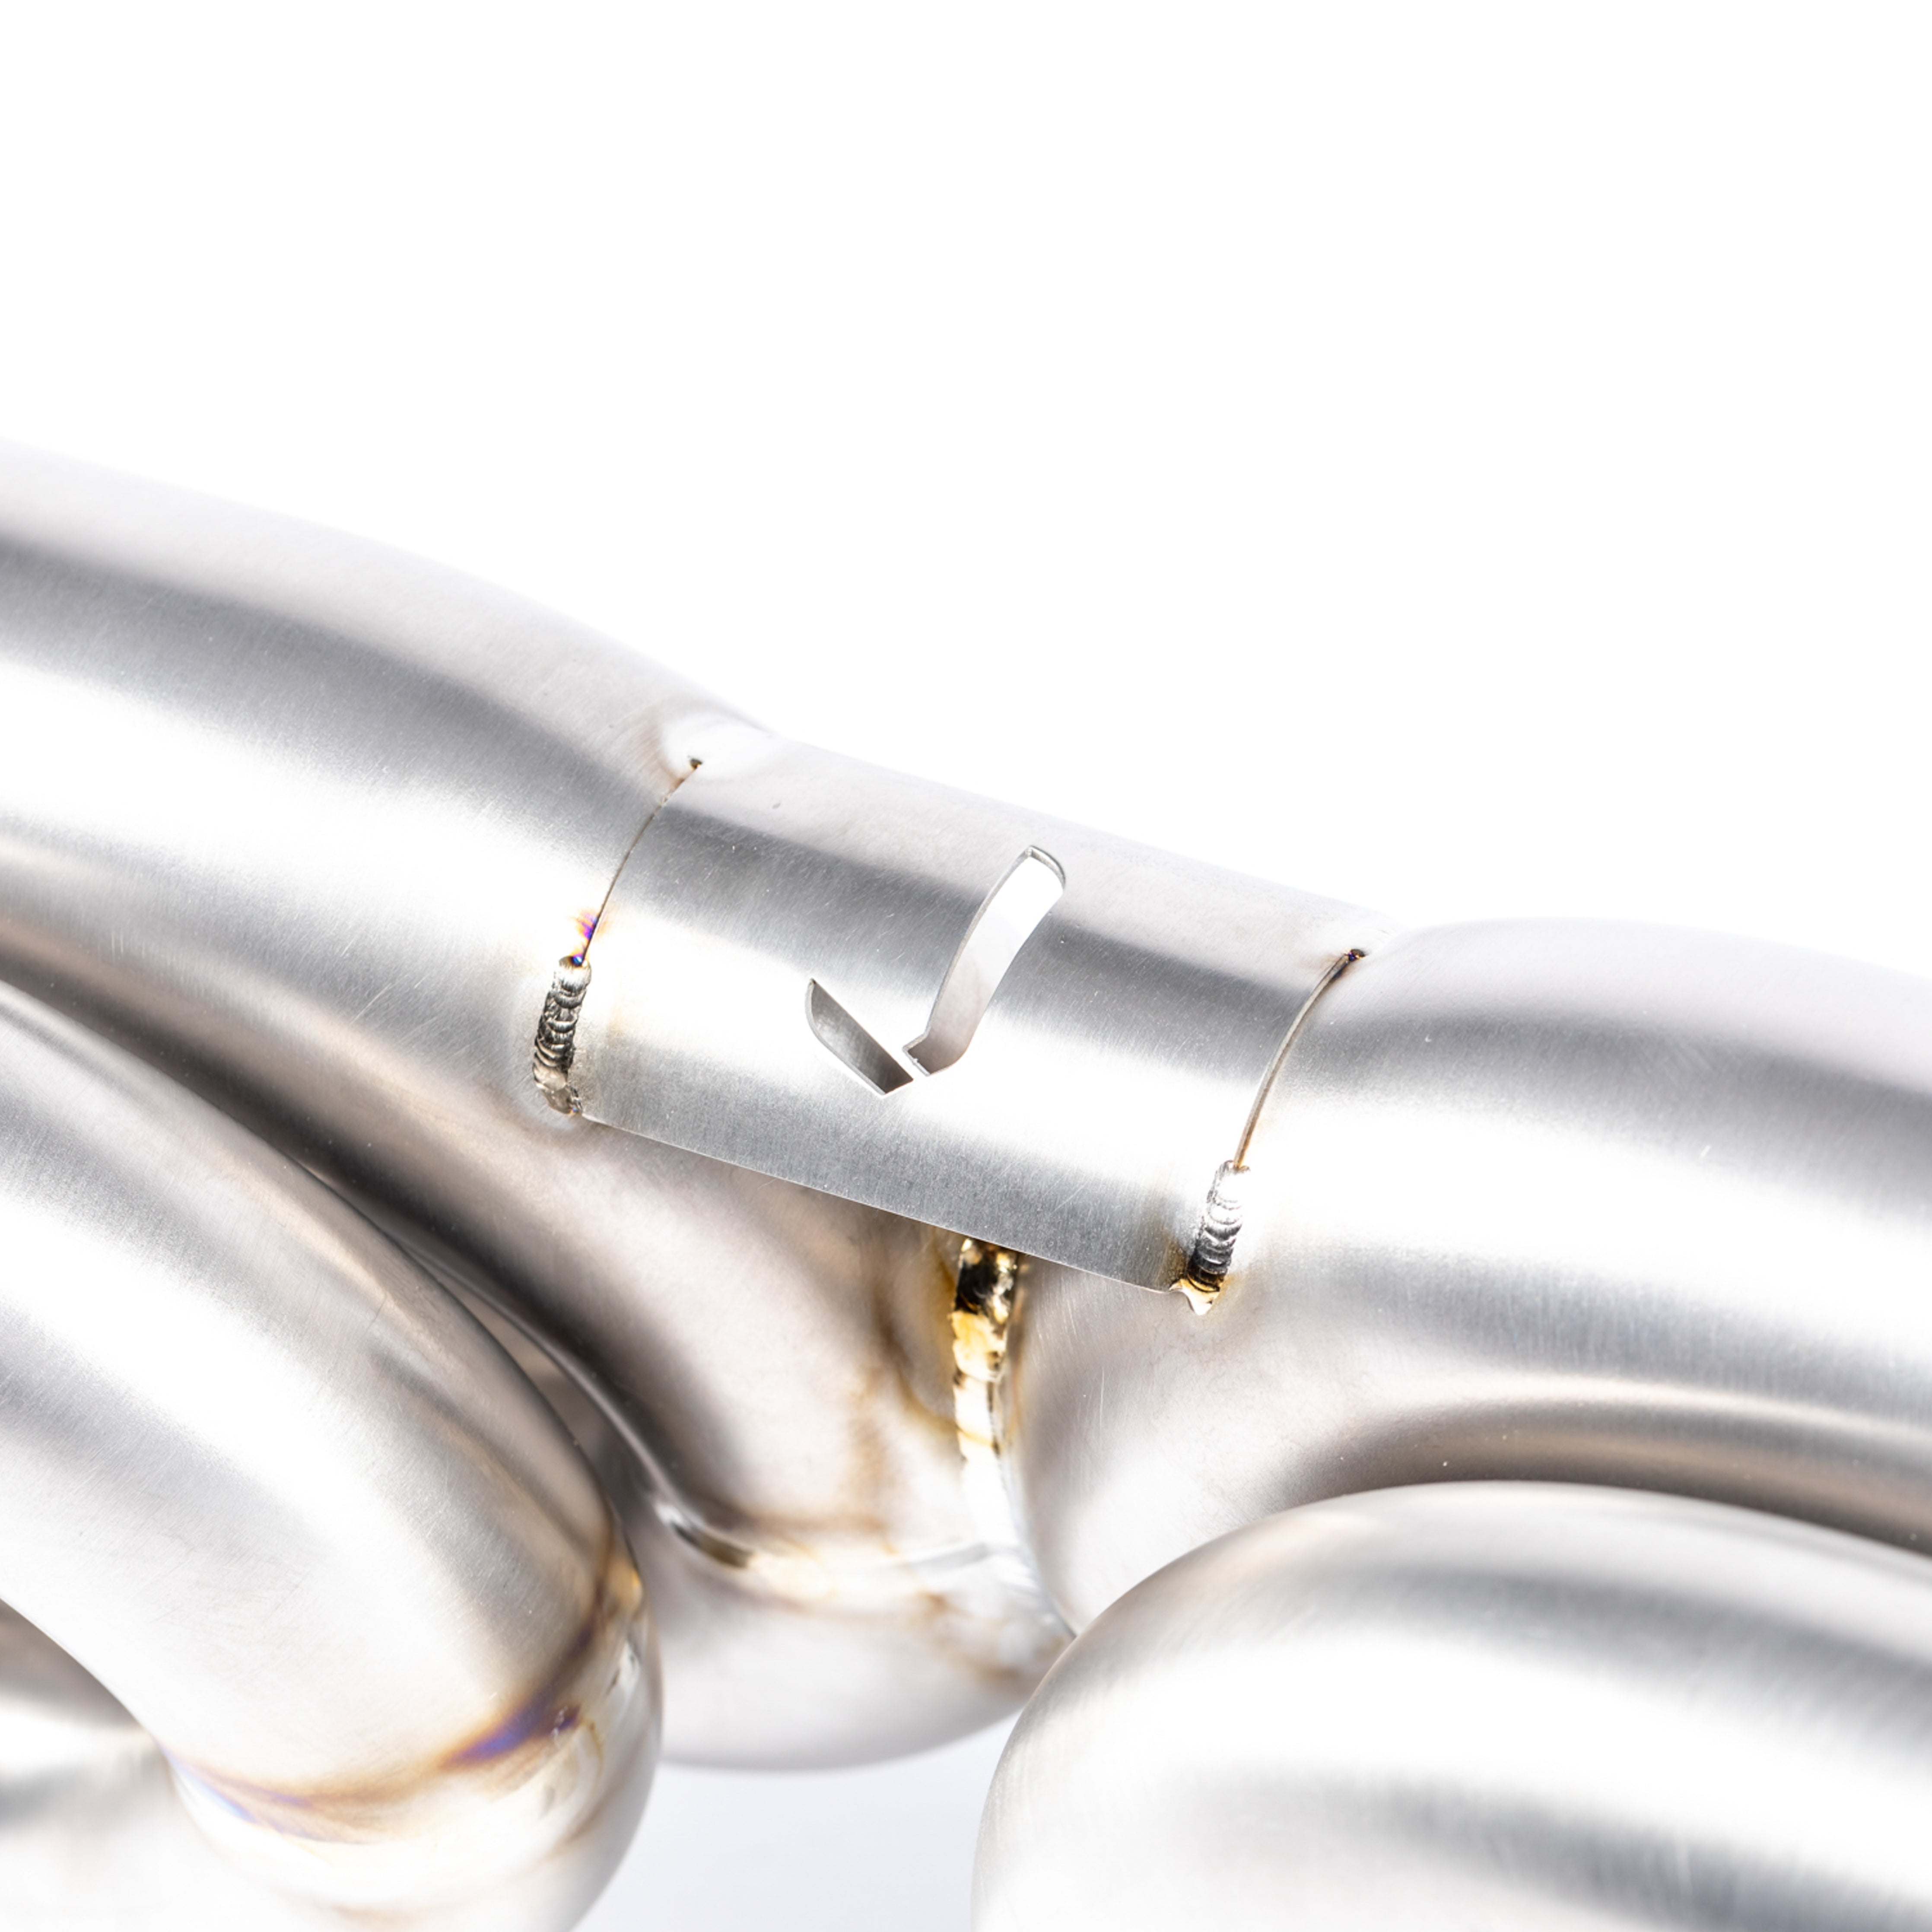 TITANE NON SILENCIEUX VALVED RACE PIPE (INCONEL ROLLED TIPS) 